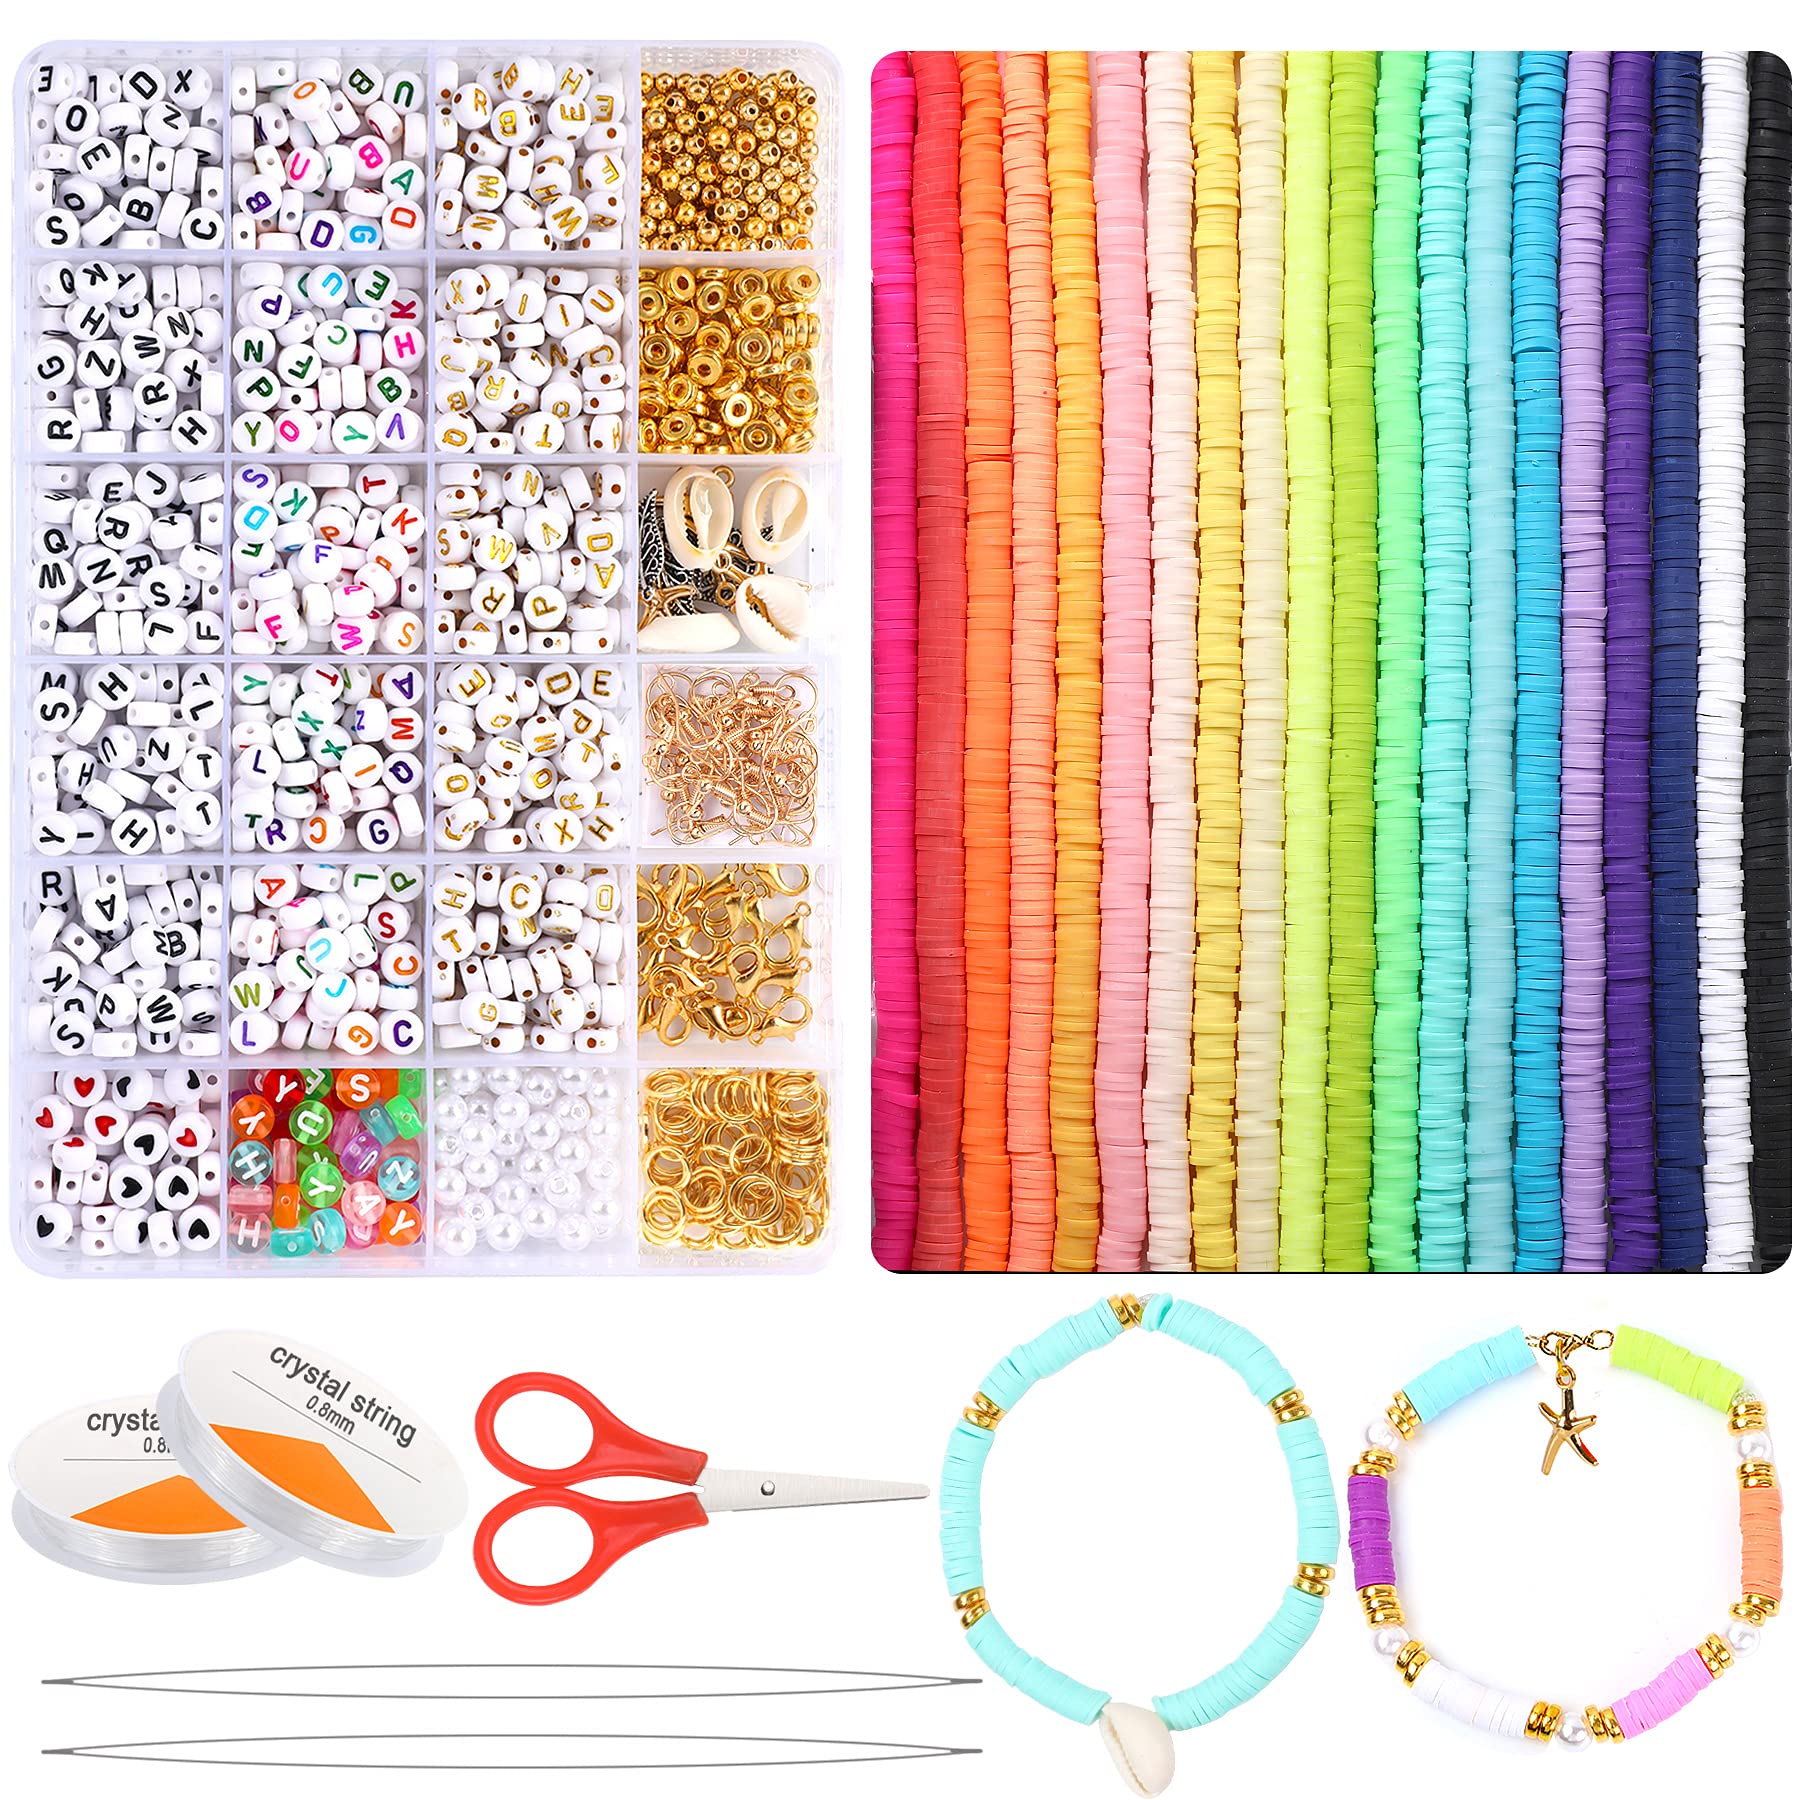 Bracelet Making Beads Kit for Girls Round Gold Beads for Jewelry Making  with Clear Storage Box Black White Clay Beads Set for